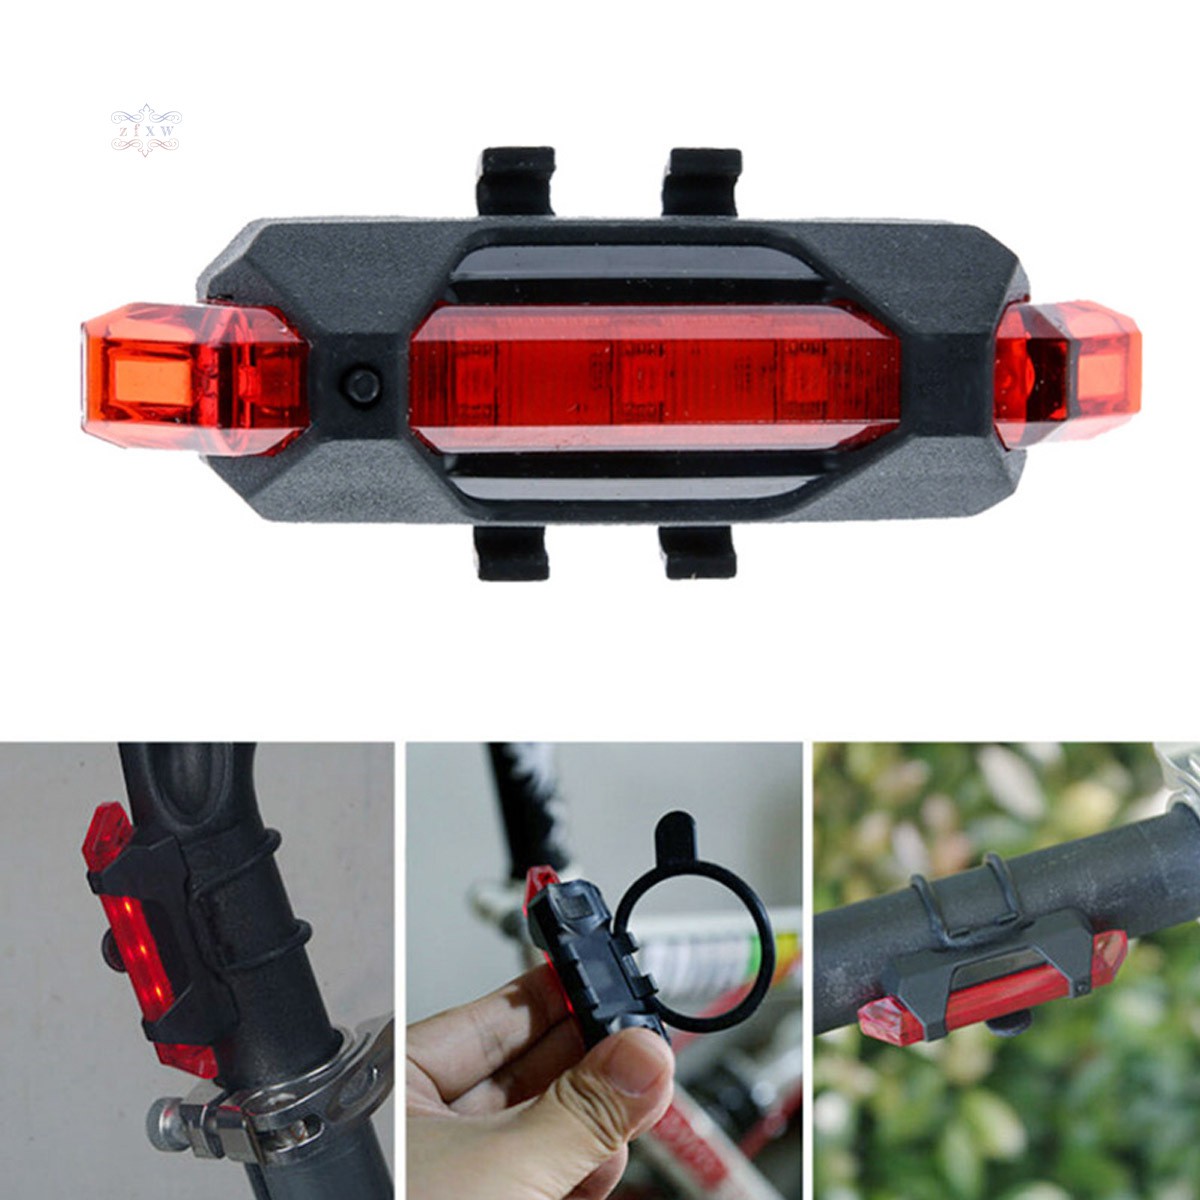 ZFXW Portable USB Rechargeable Bike Bicycle Tail Rear Safety Warning Light Taillight  Lamp Super Bright @VN